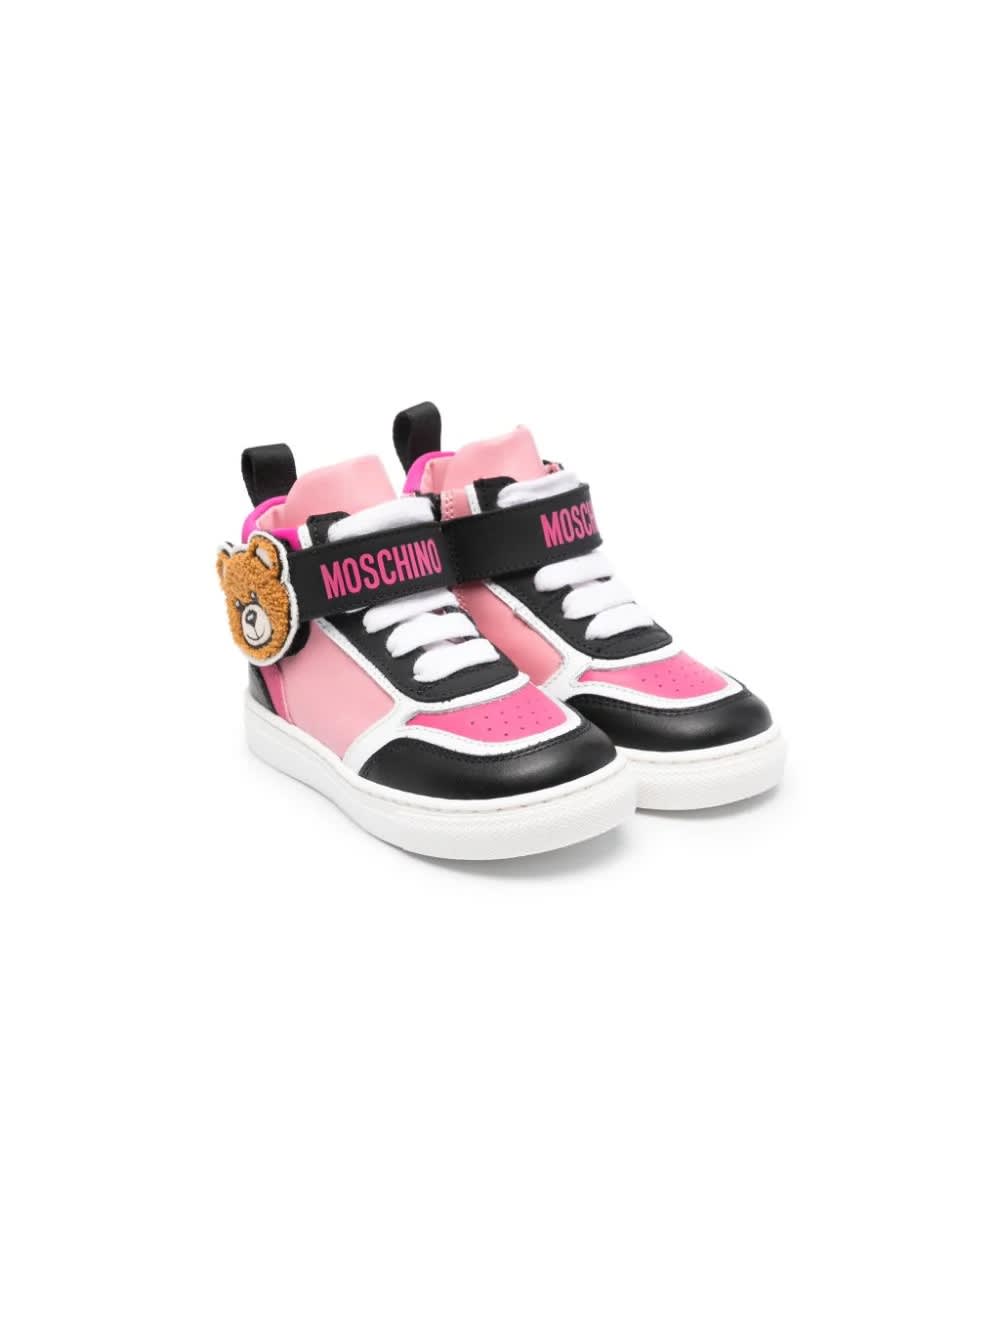 Moschino Kids' Sneakers Alte In Pink